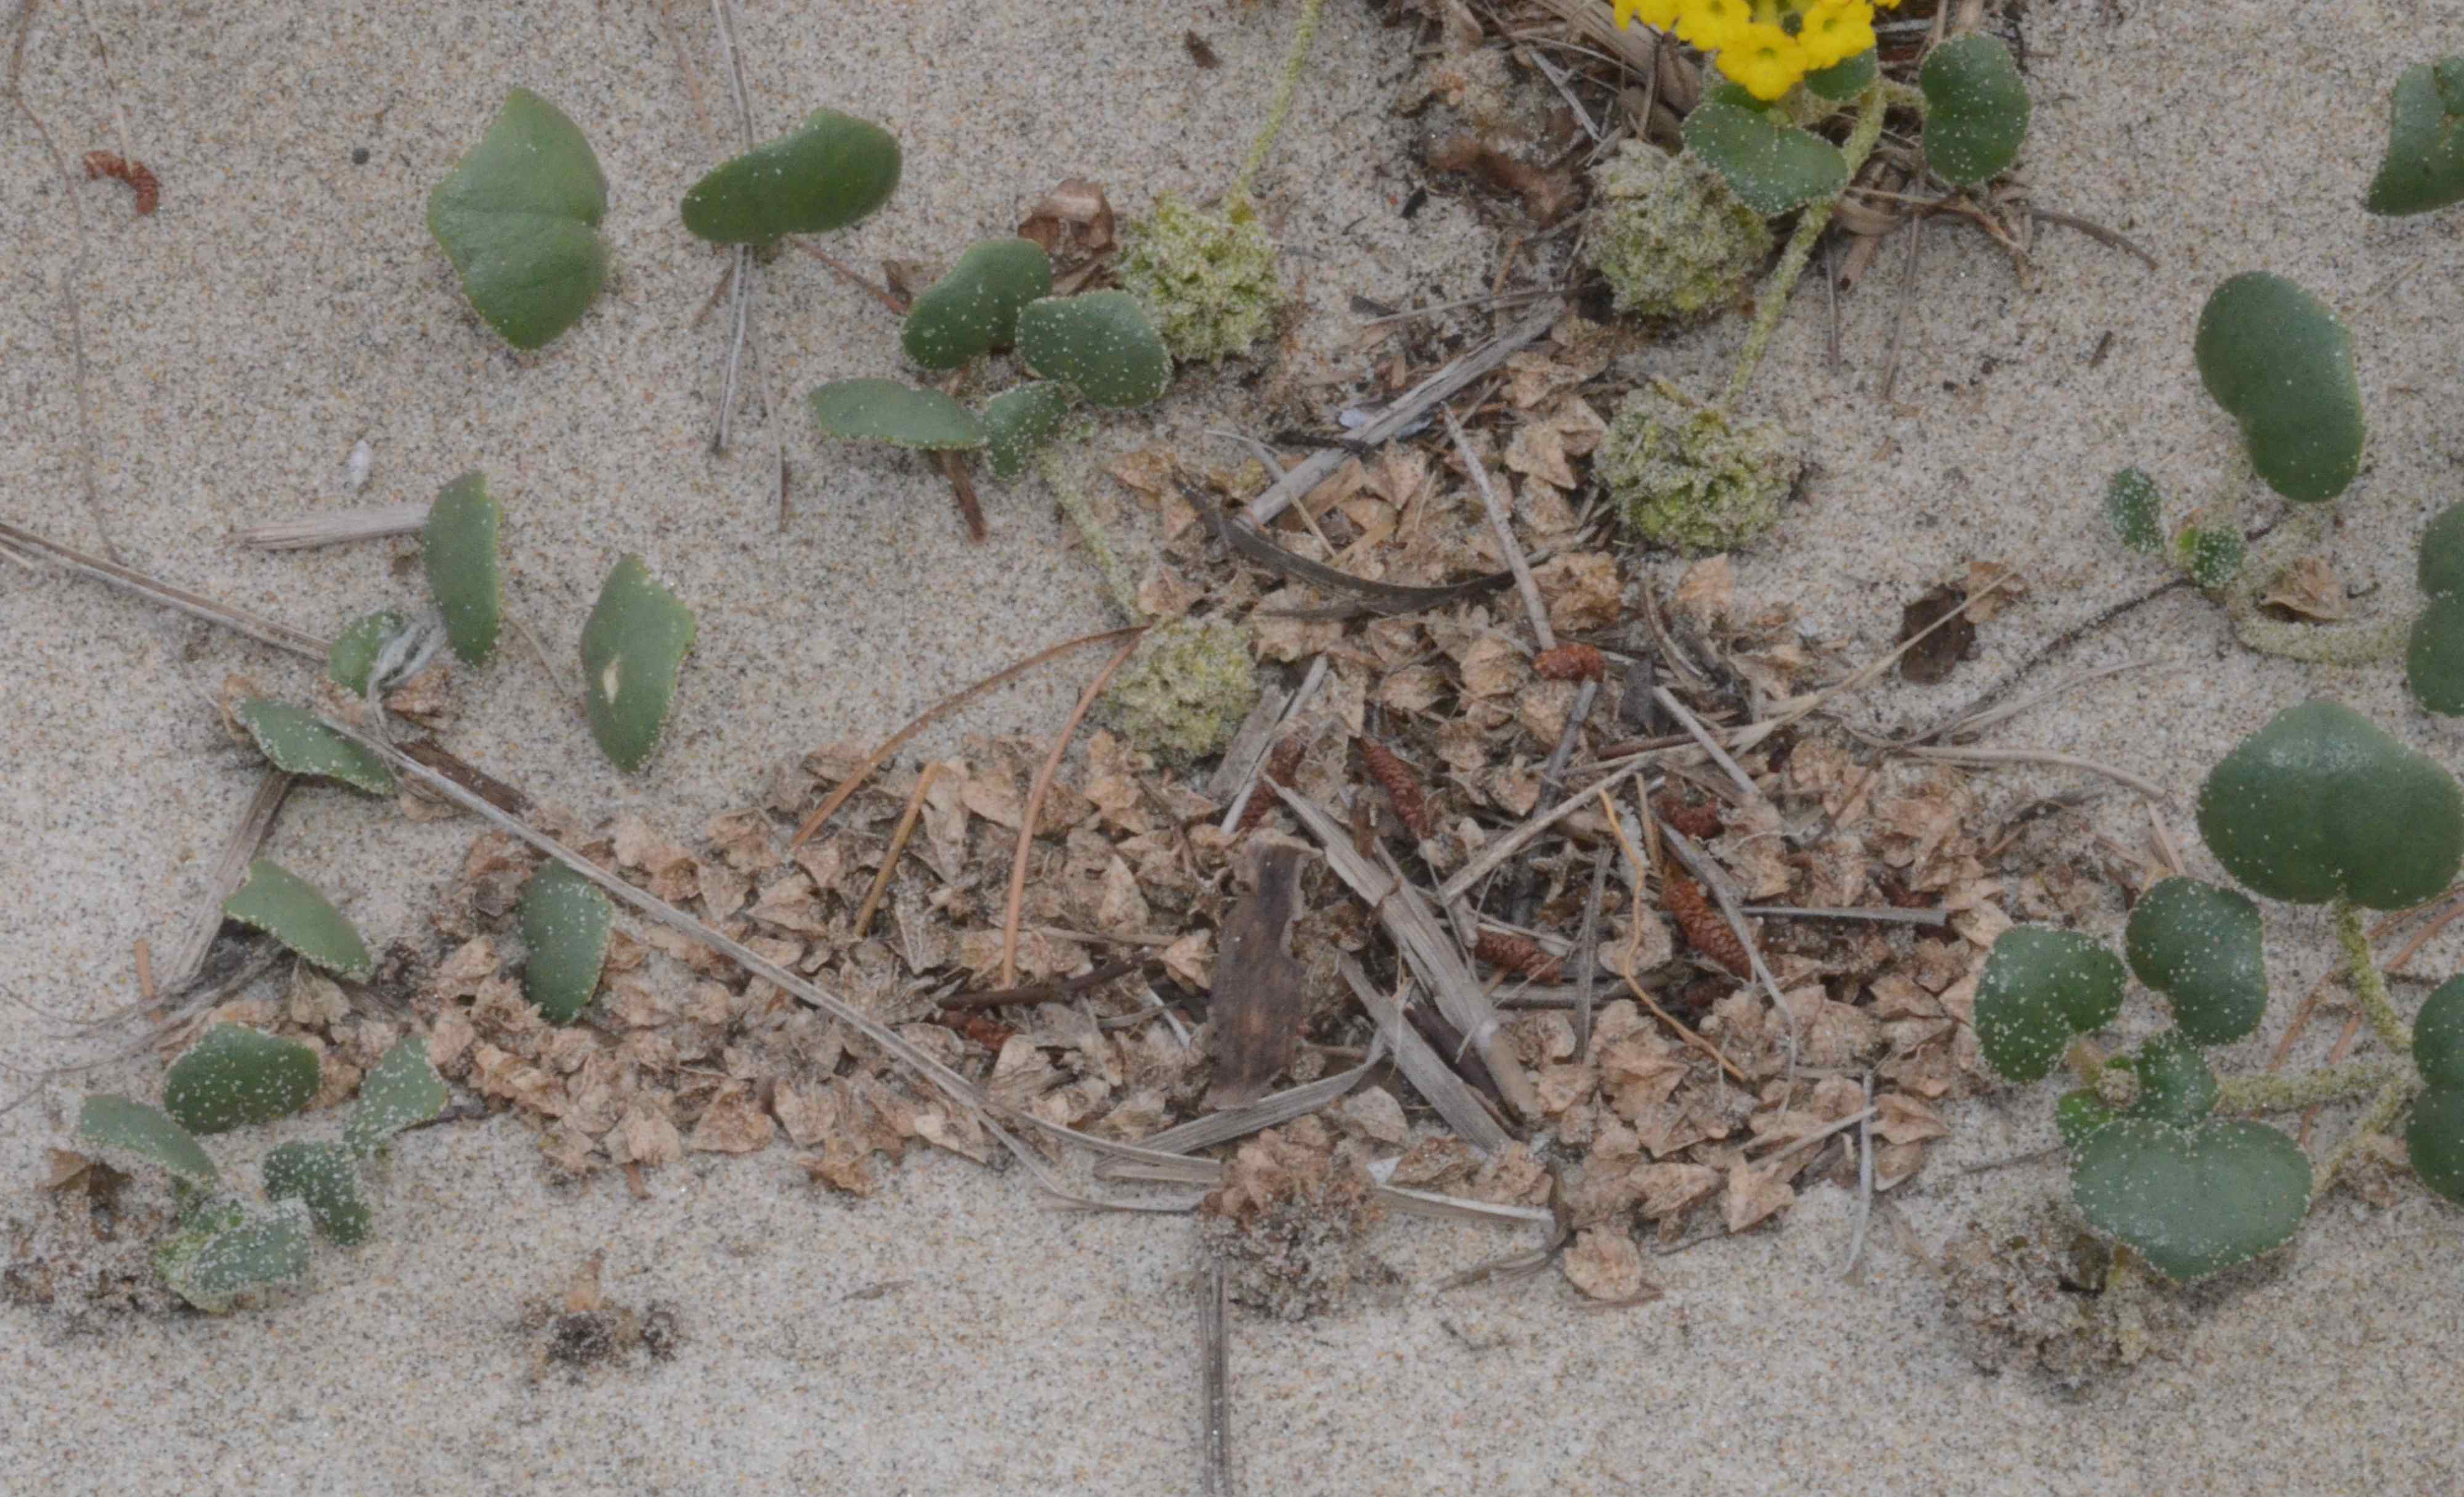 Abronia latifolia fruits that have dispersed near the plant on top of a sandy soil.